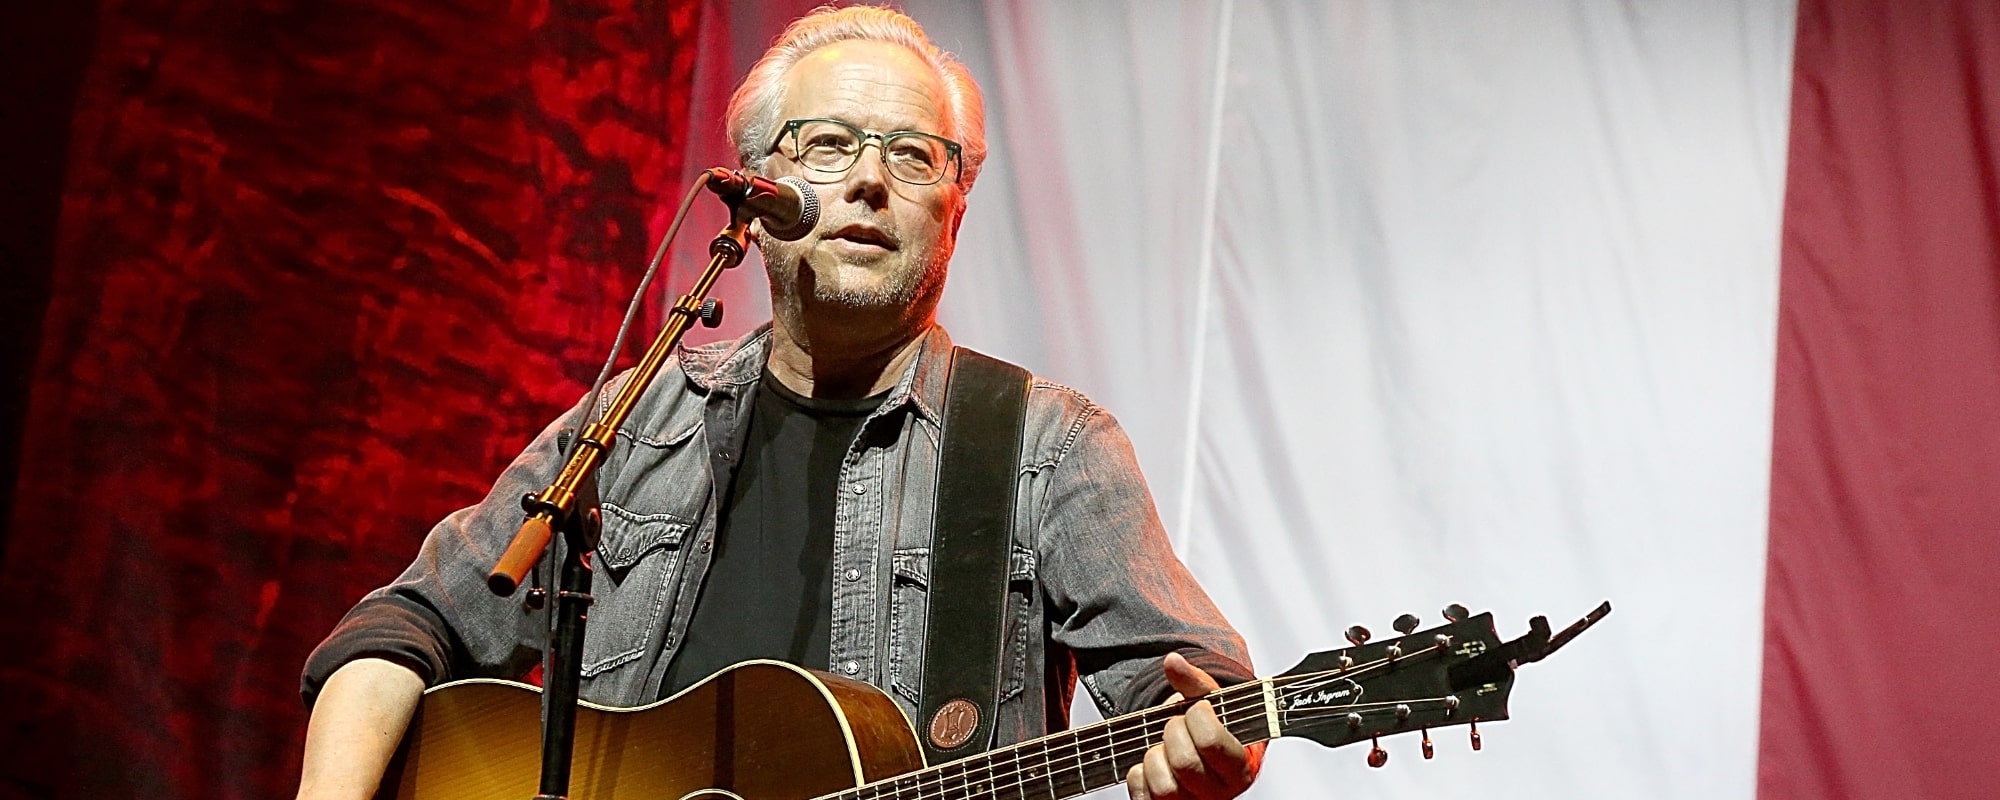 Radney Foster Cancels Festival Appearance, Postpones Acoustic Show “On Doctor’s Orders”